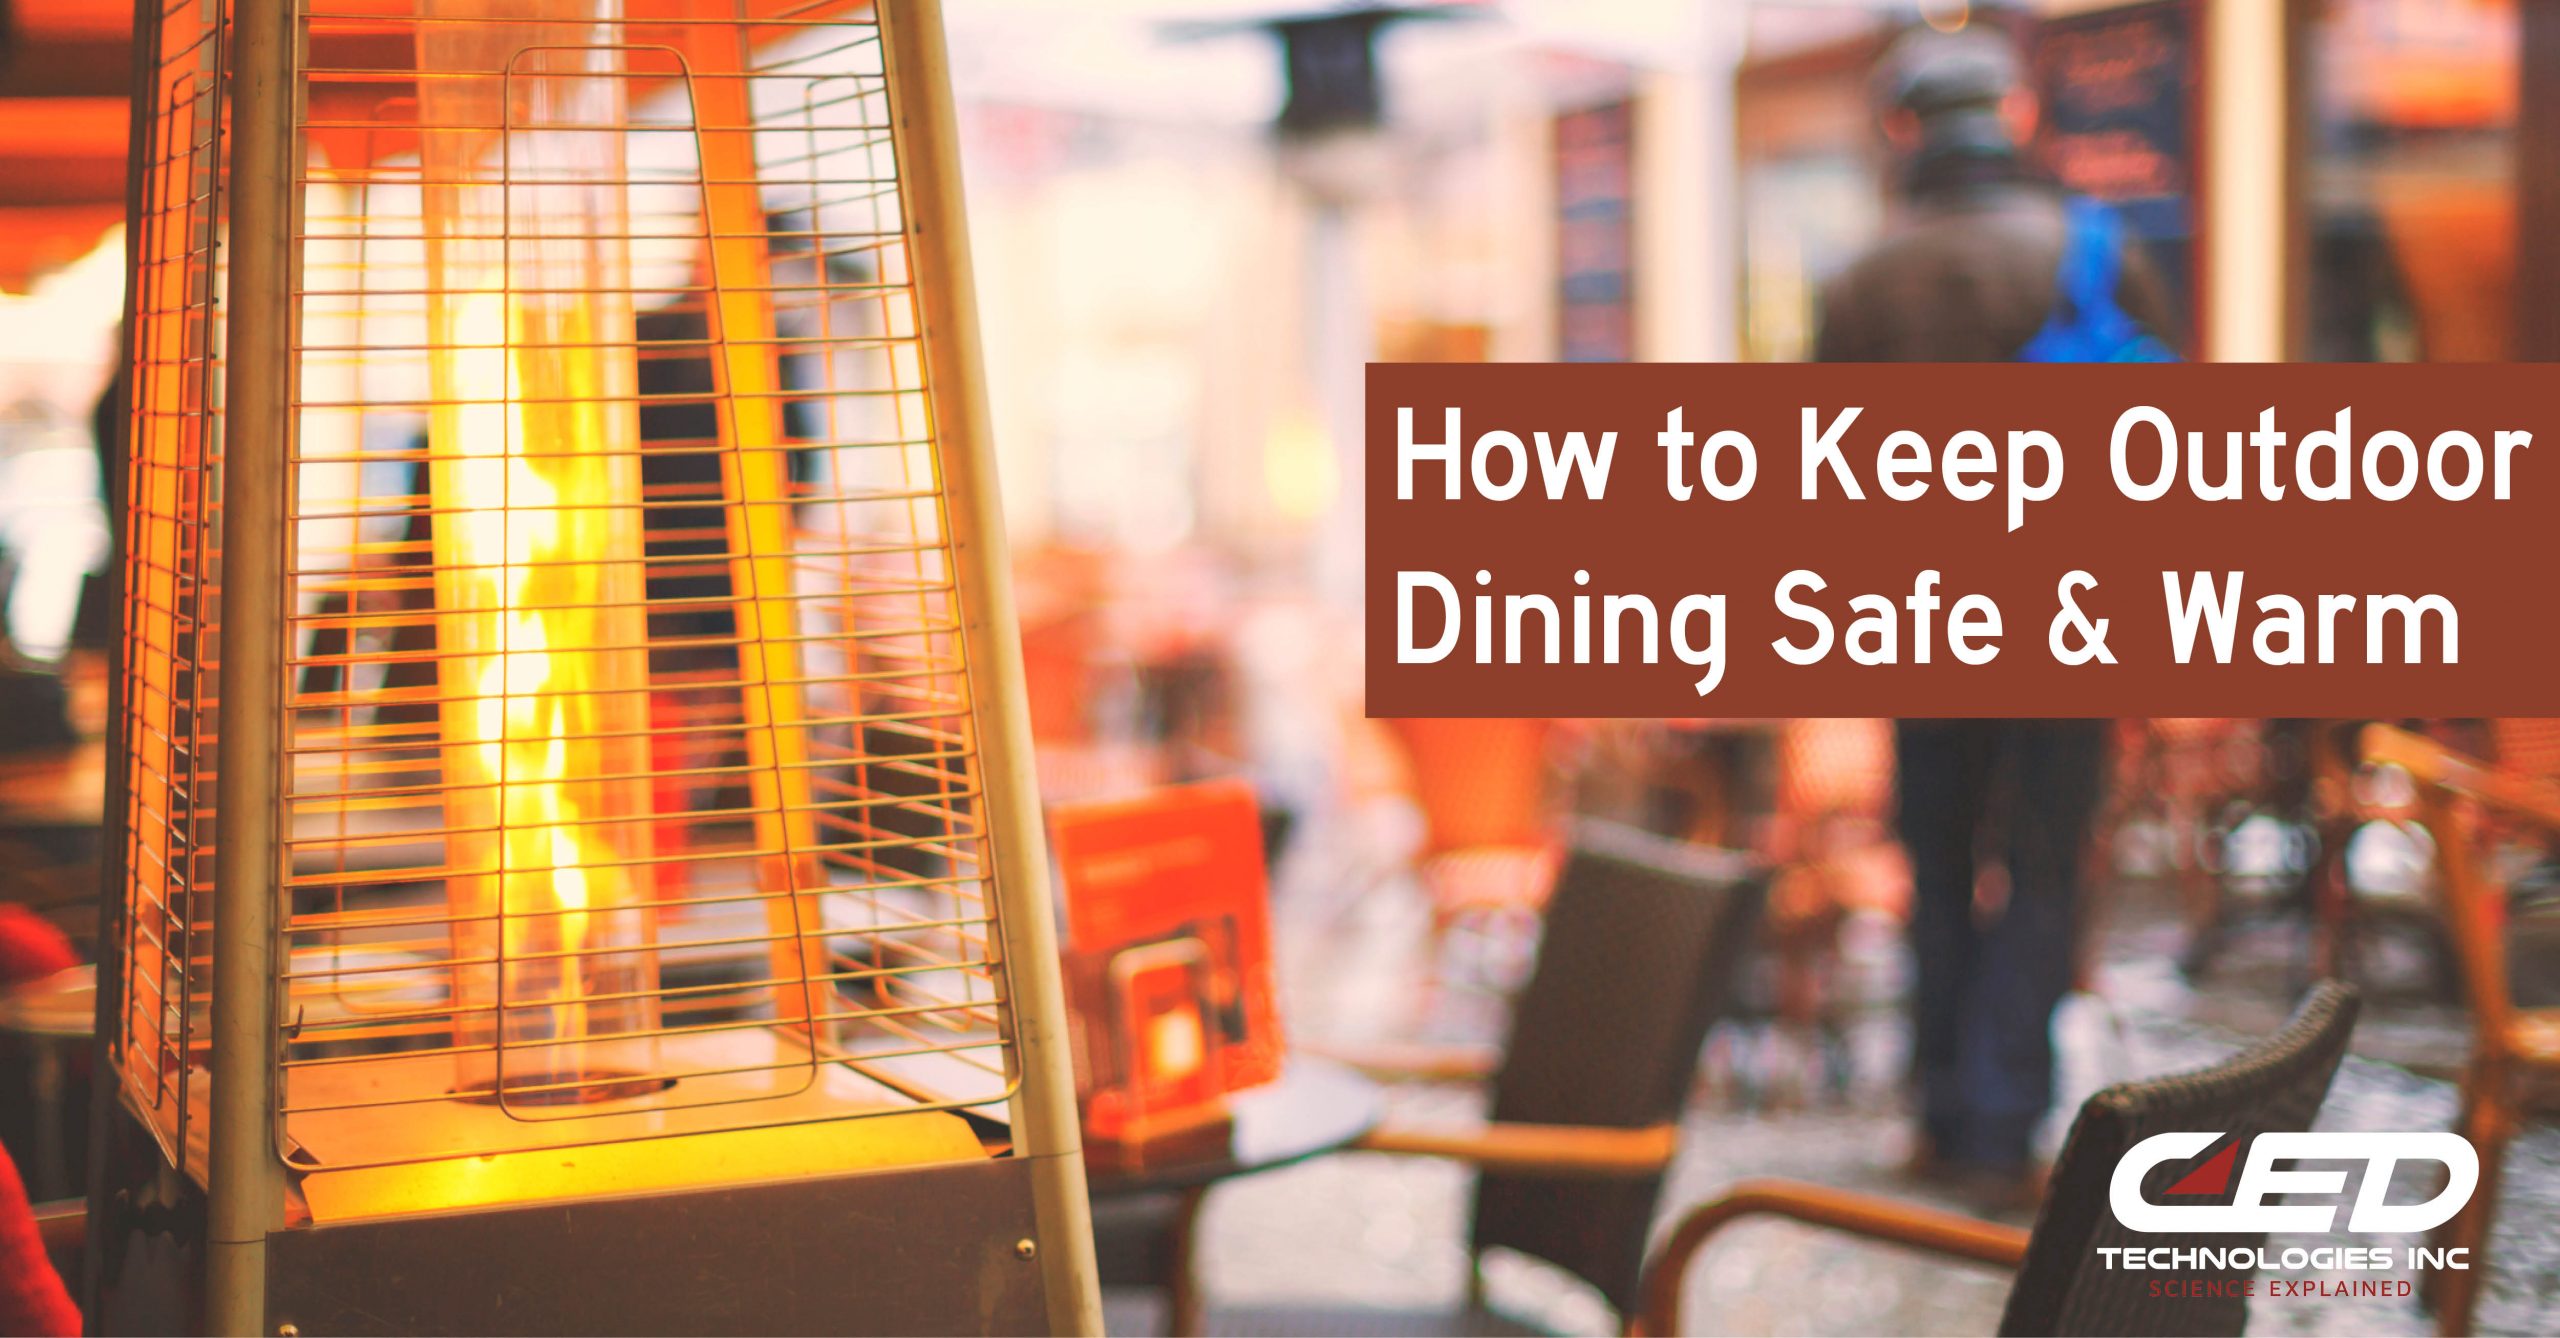 Keep Outdoor Dining Safe and Warm for Everyone